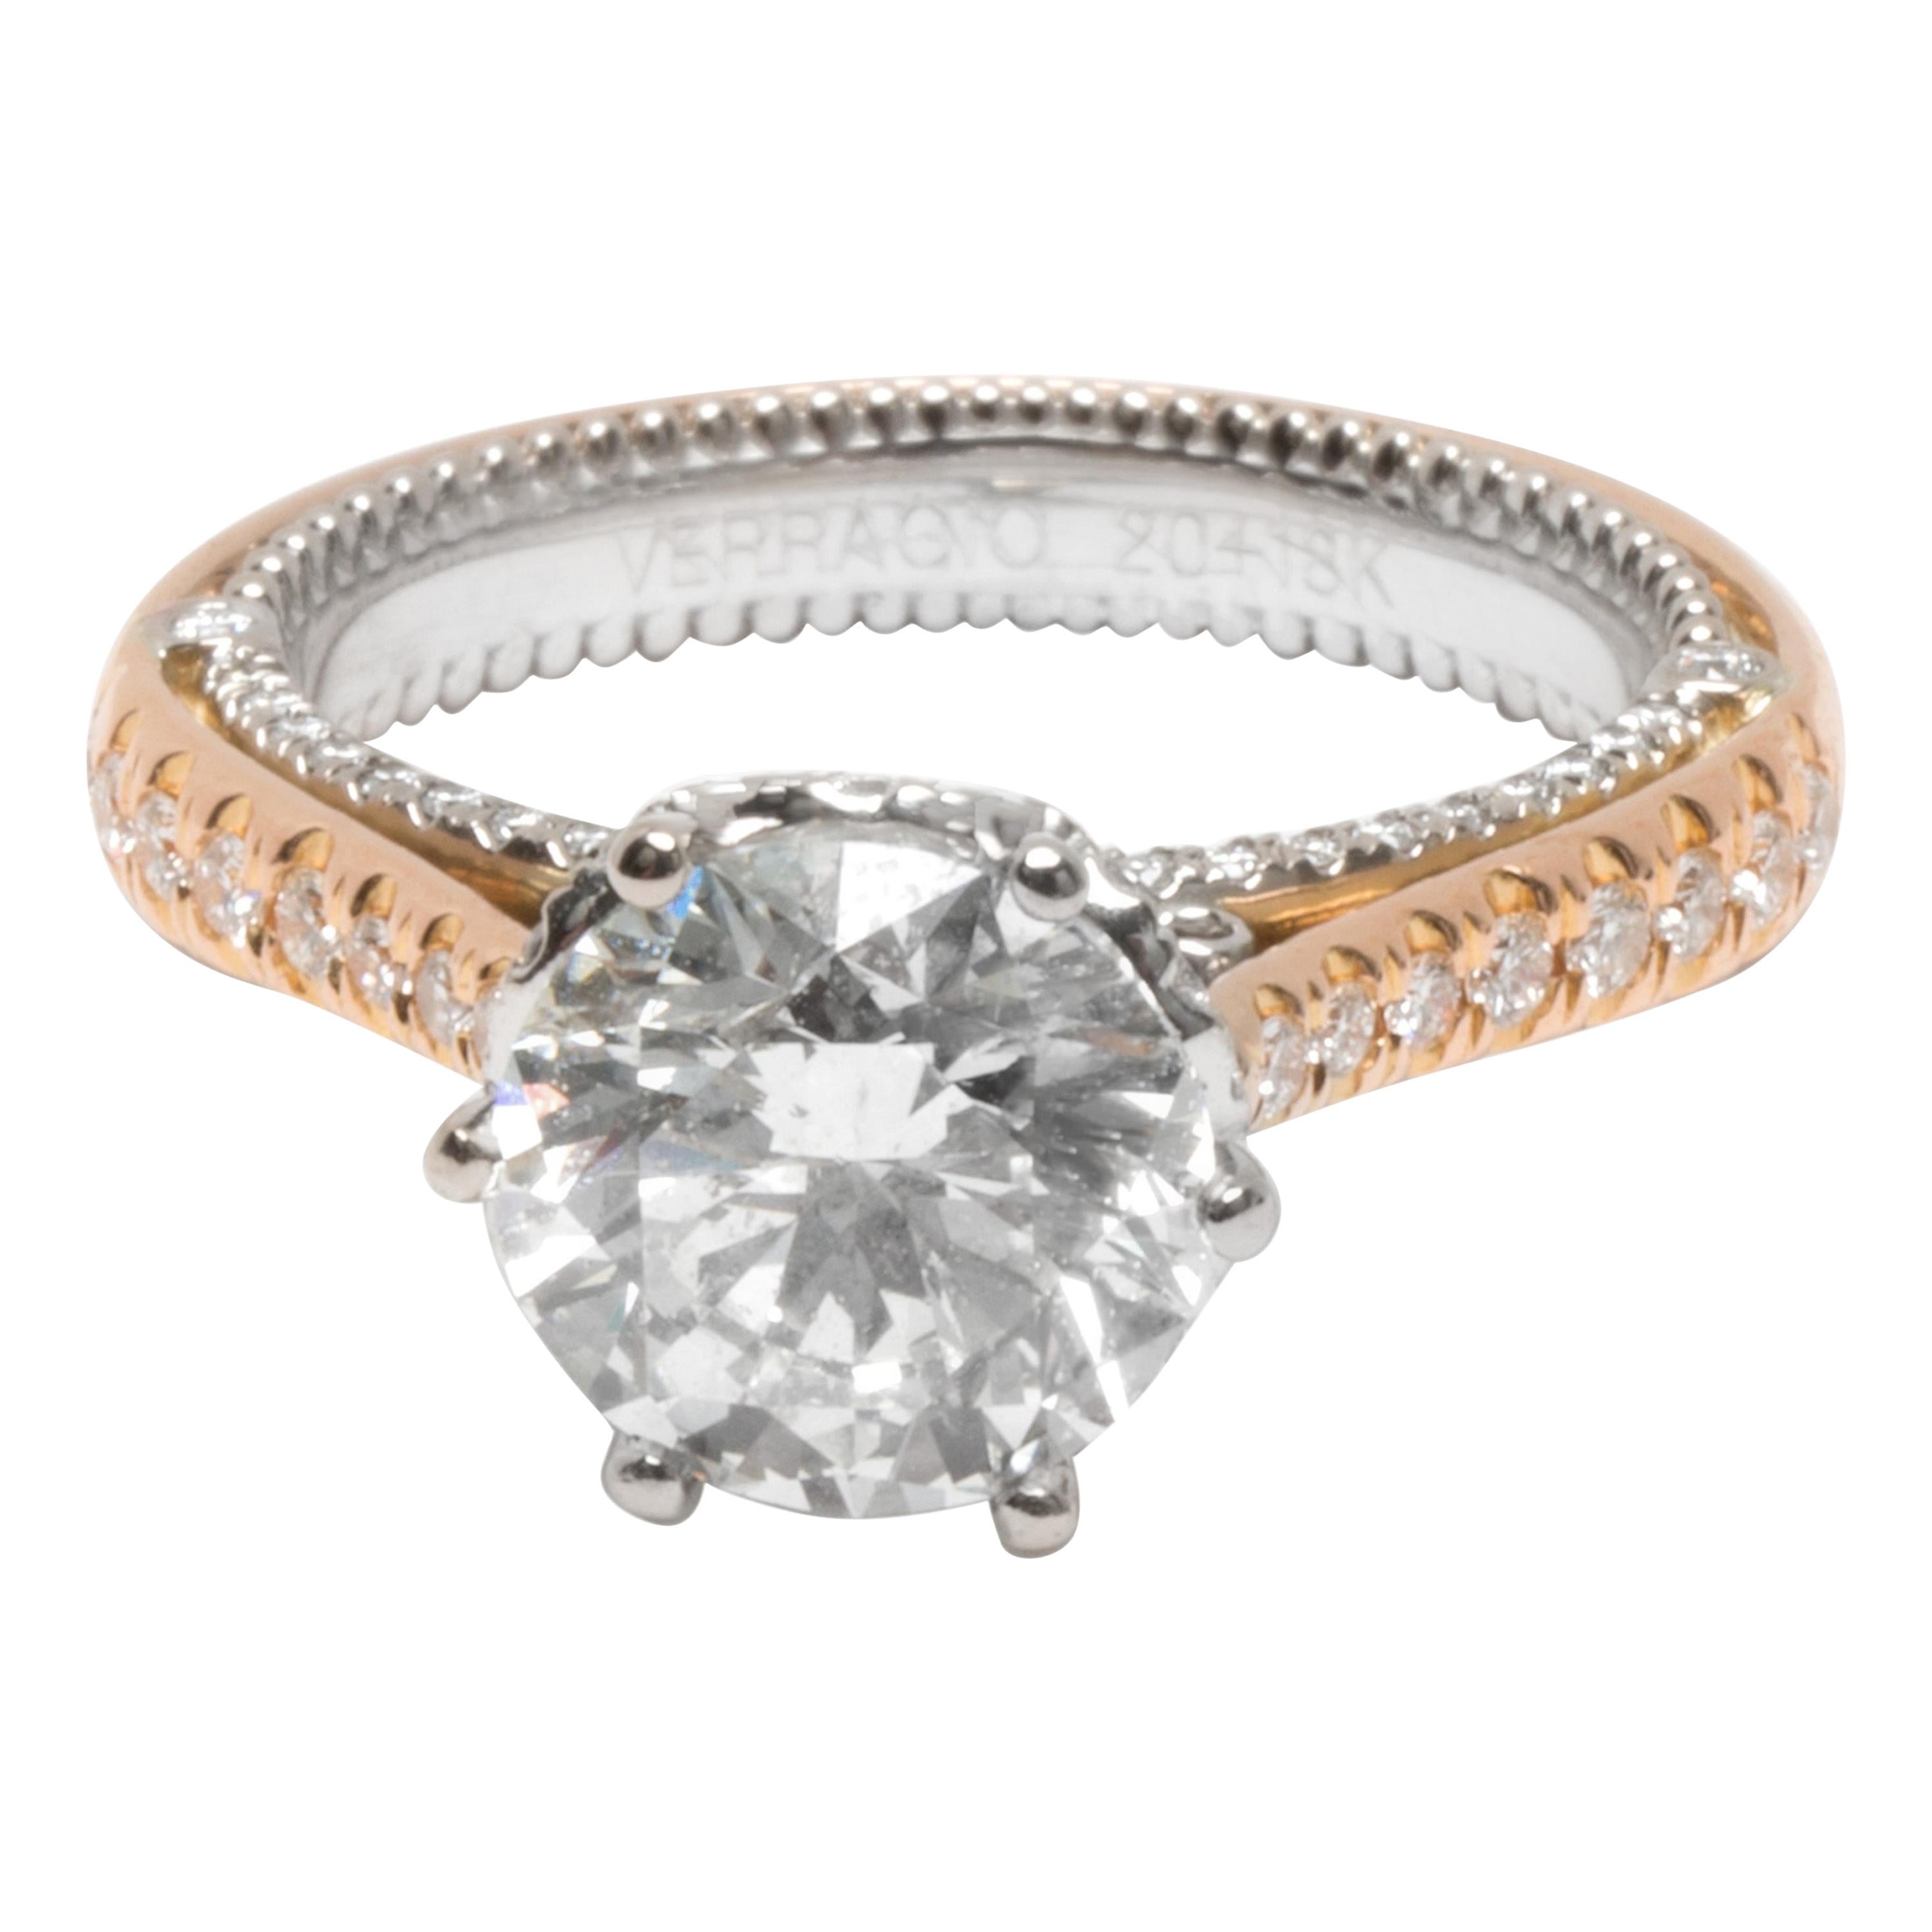 GIA Certified Verragio Diamond Engagement Ring in 2-Tone Gold '2.02 Carat H/SI2'